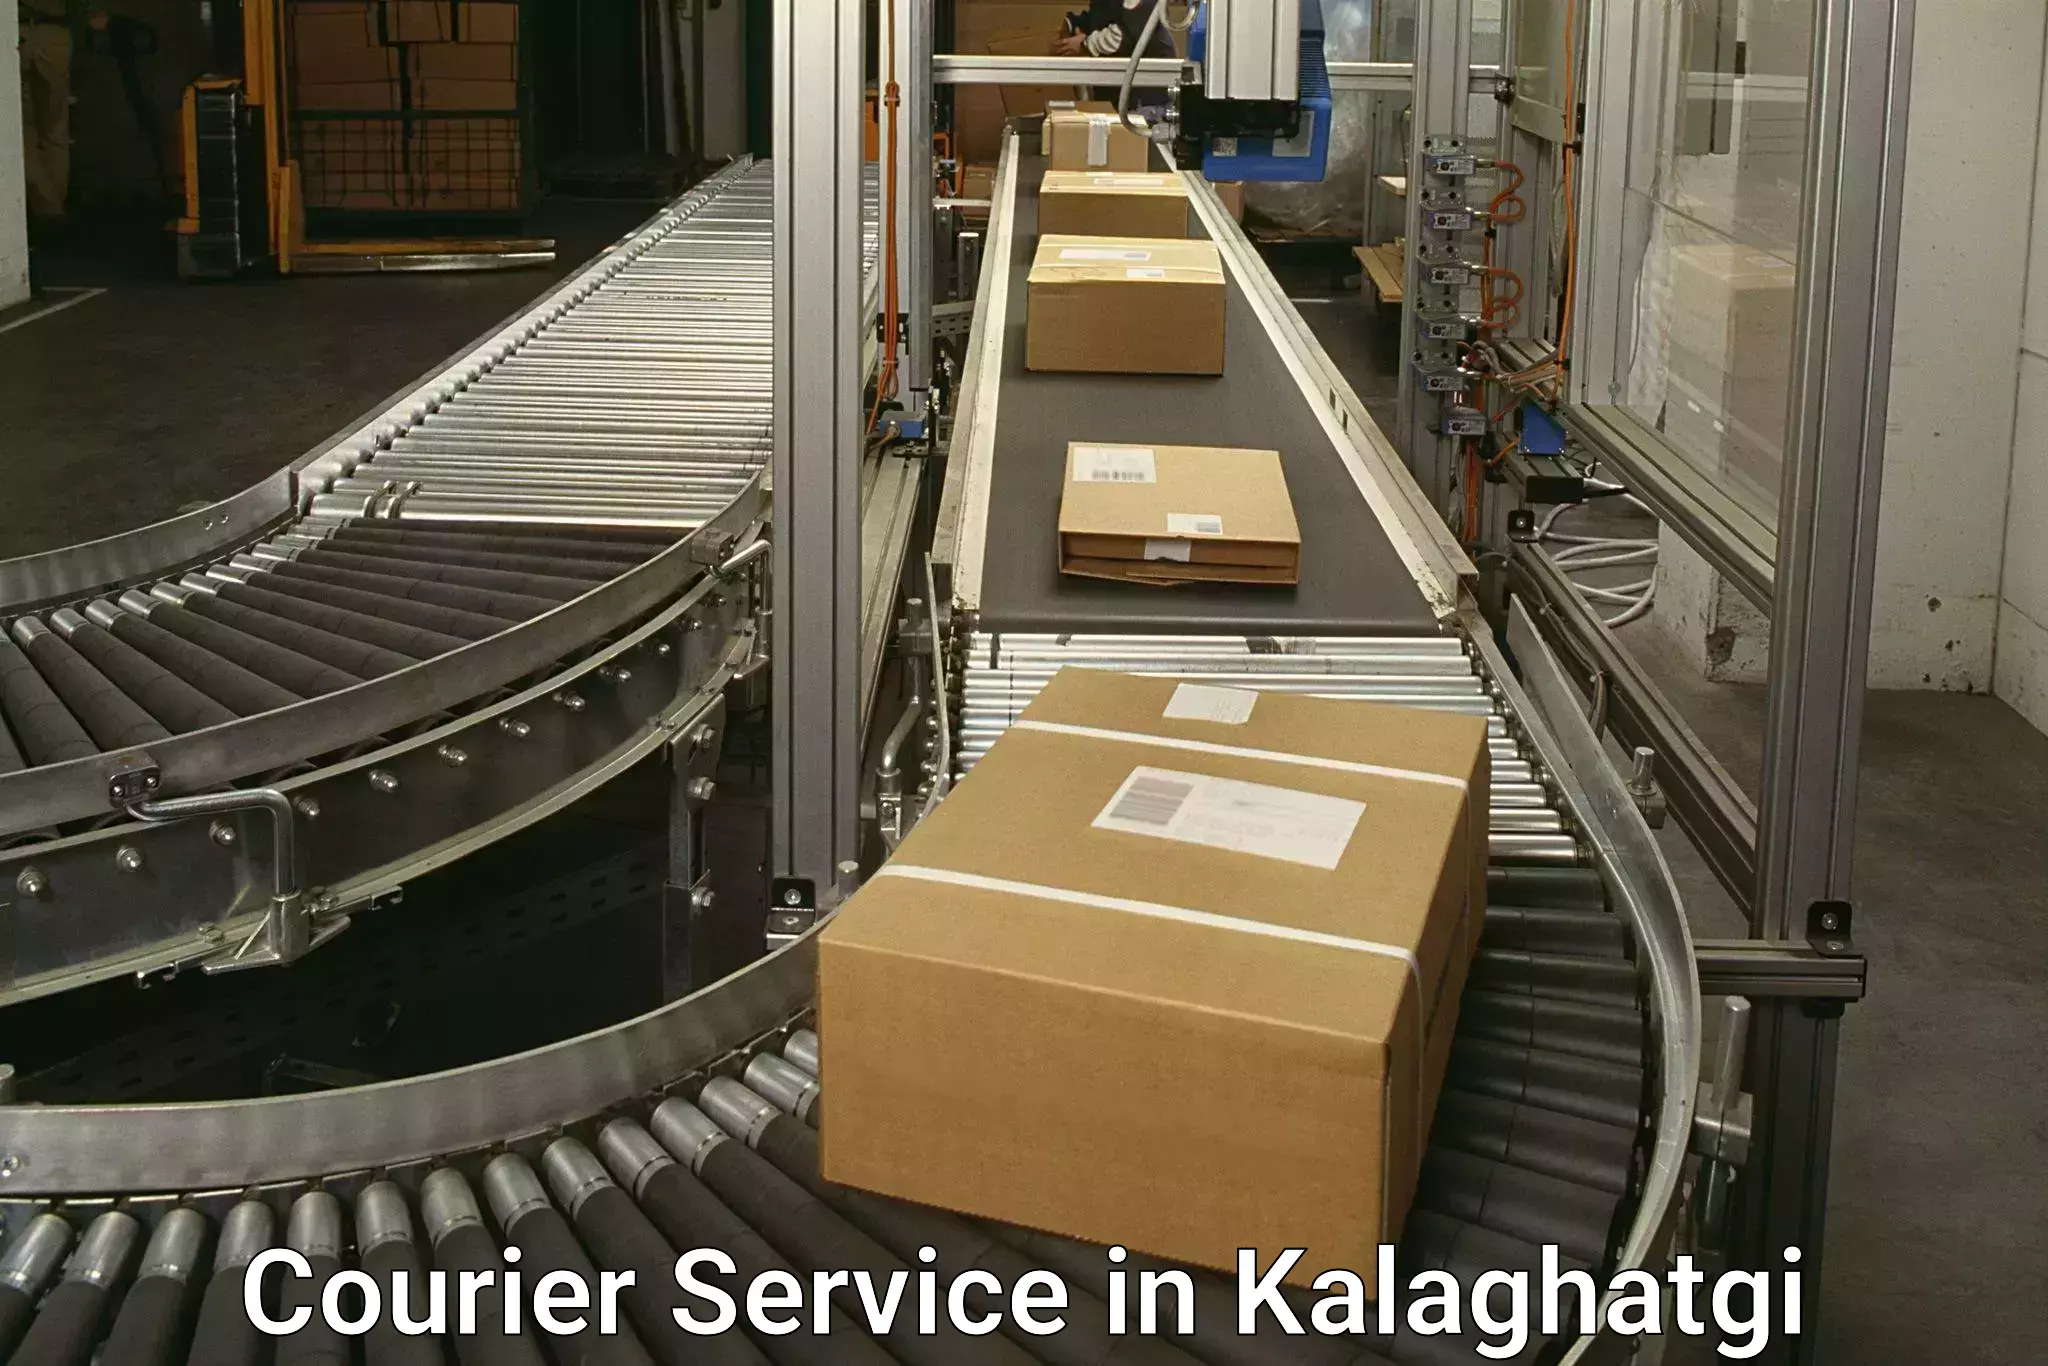 Flexible delivery schedules in Kalaghatgi